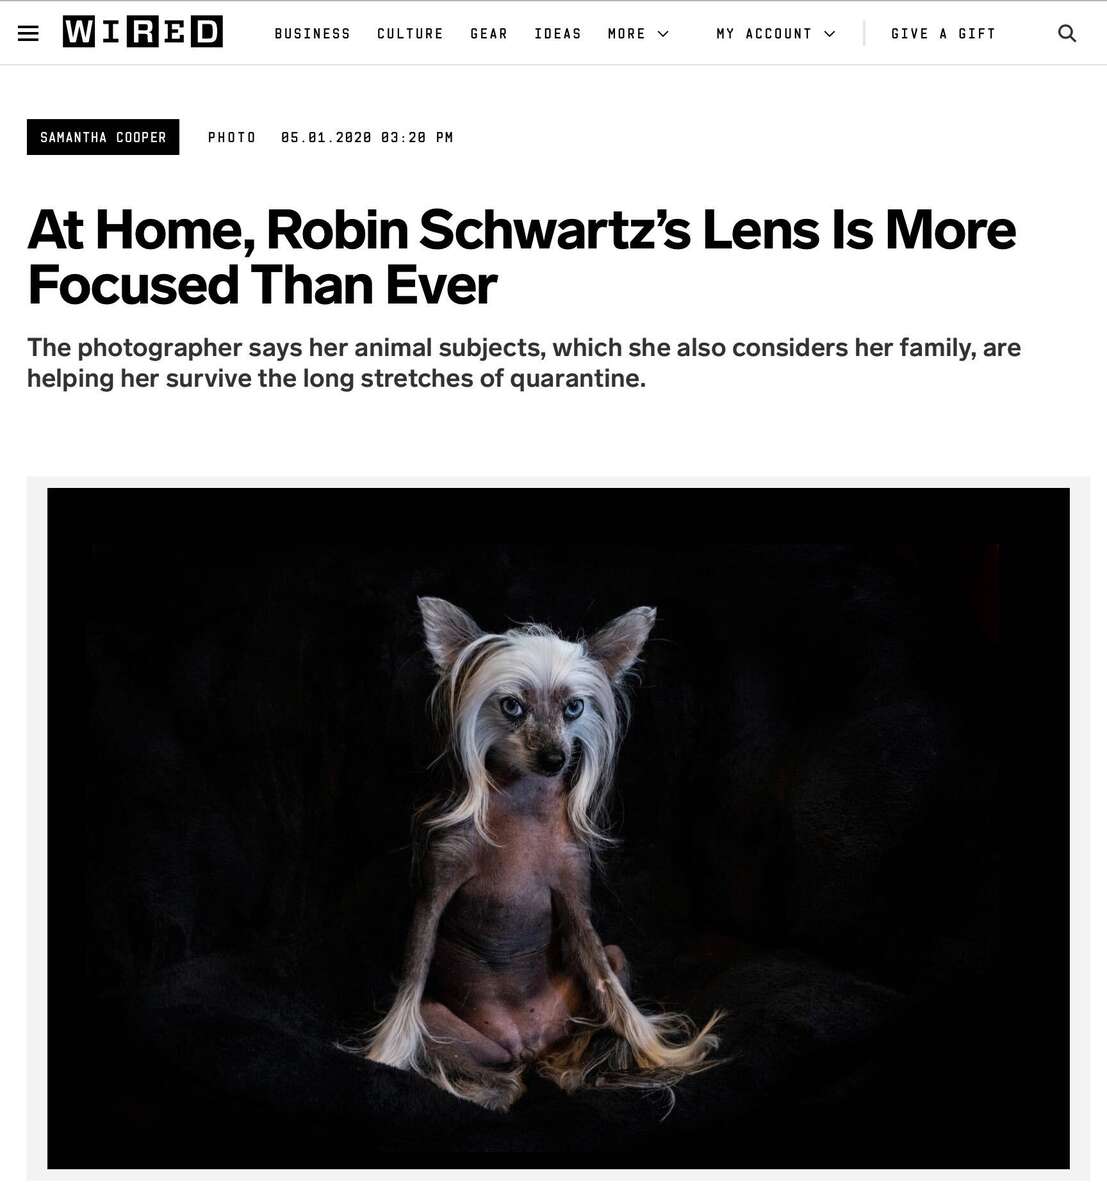  Wired Magazine Assignment: Shuttered at Home, Quarantine Interview and 7 Photographs   https://www.wired.com/story/robin-schwartz-quarantine-animals/ 